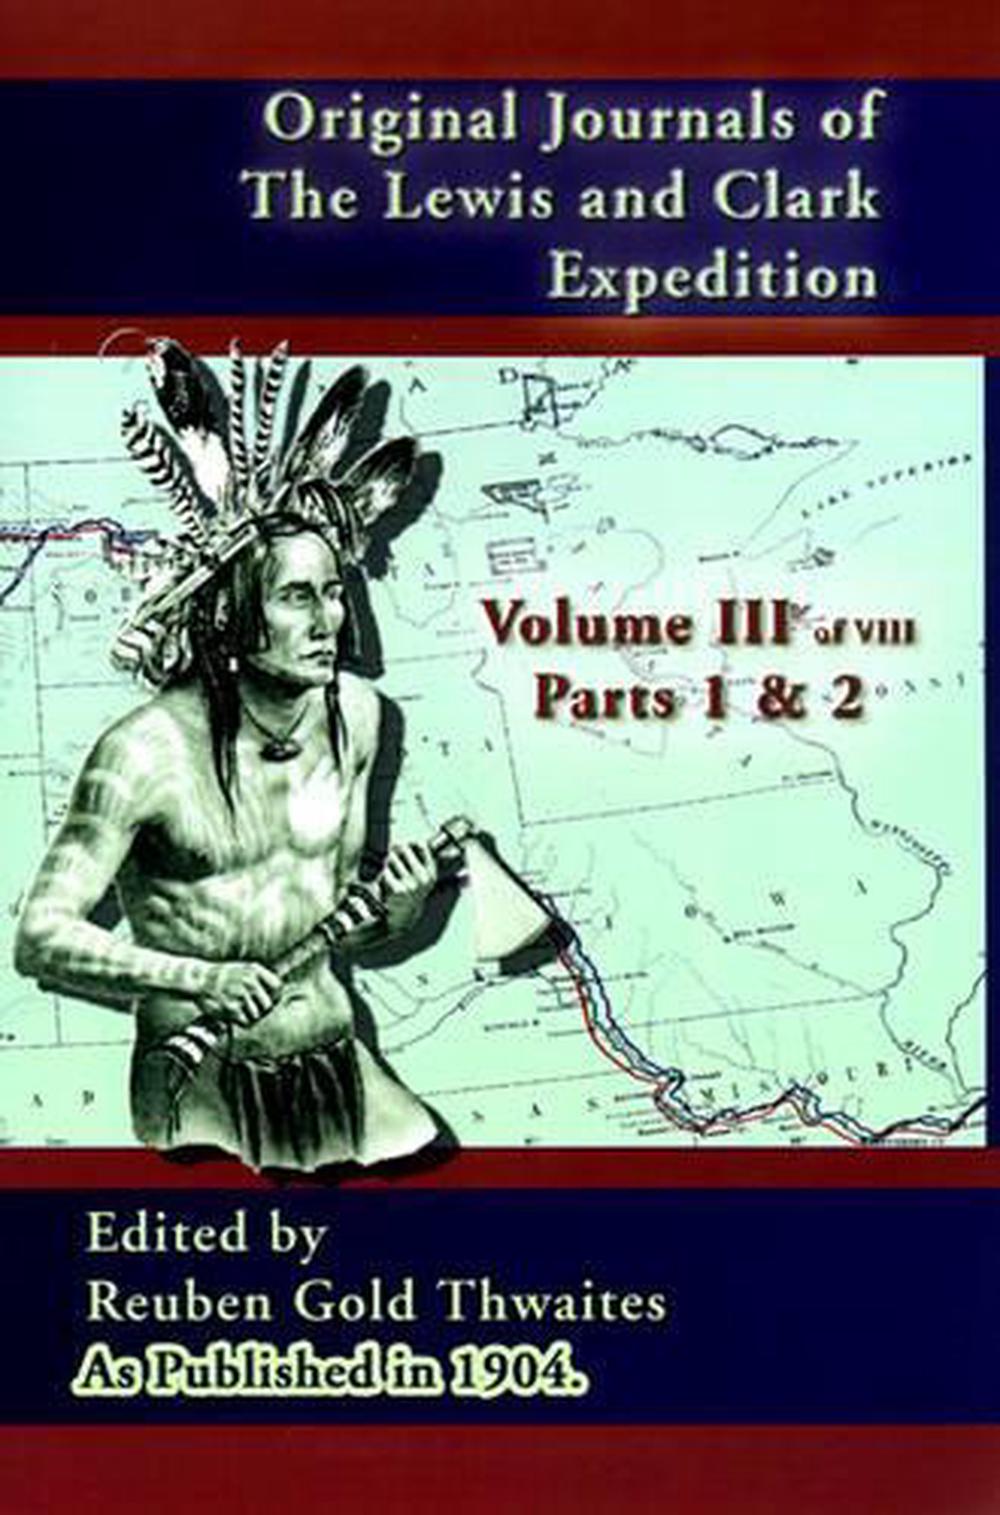 The Journals of the Lewis and Clark Expedition, Volume 8 by Meriwether Lewis